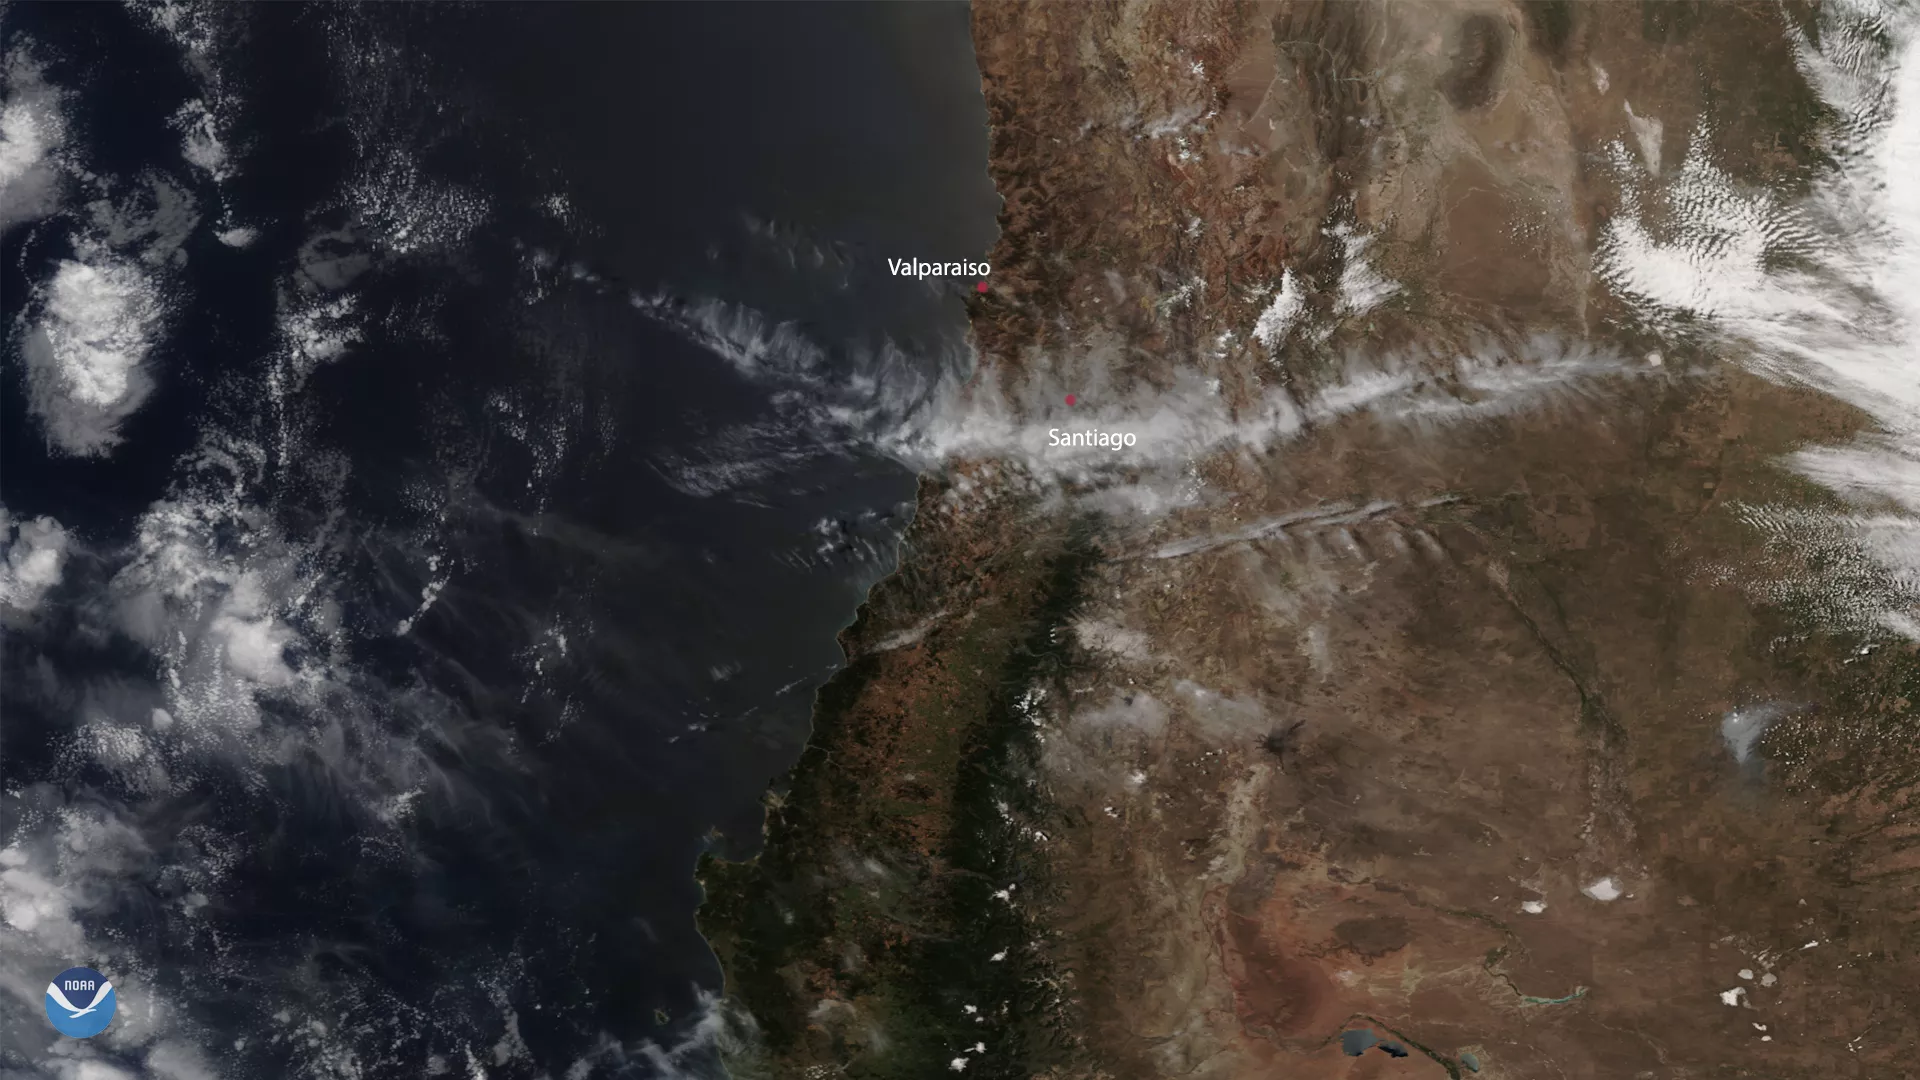 On Dec. 25, the NOAA-20 satellite captured the aftermath of the Valparaiso fires near Santiago, Chile.